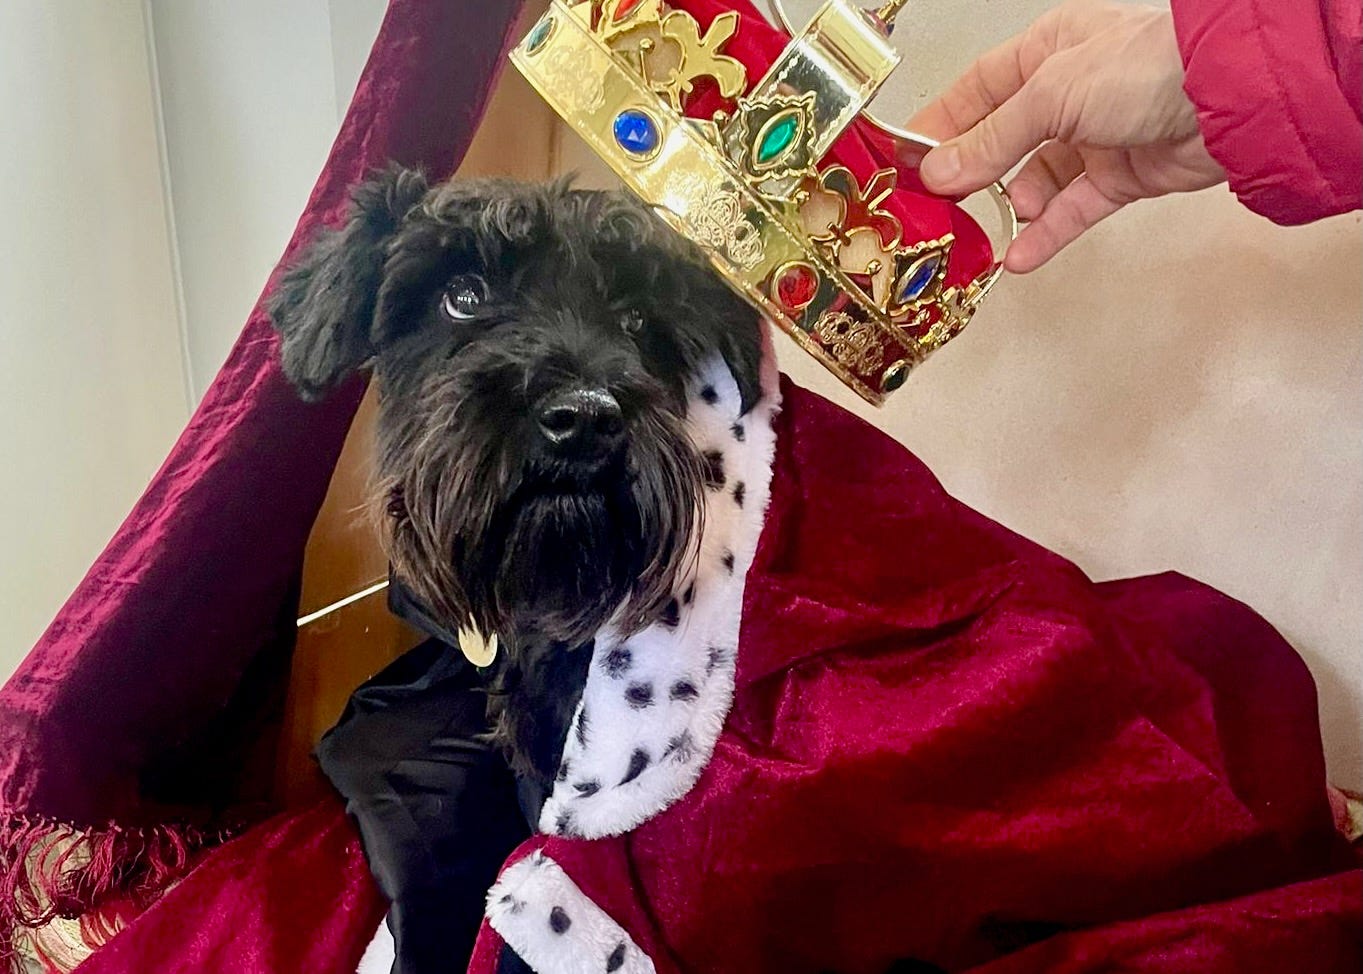 Dog on royal throne being crowned